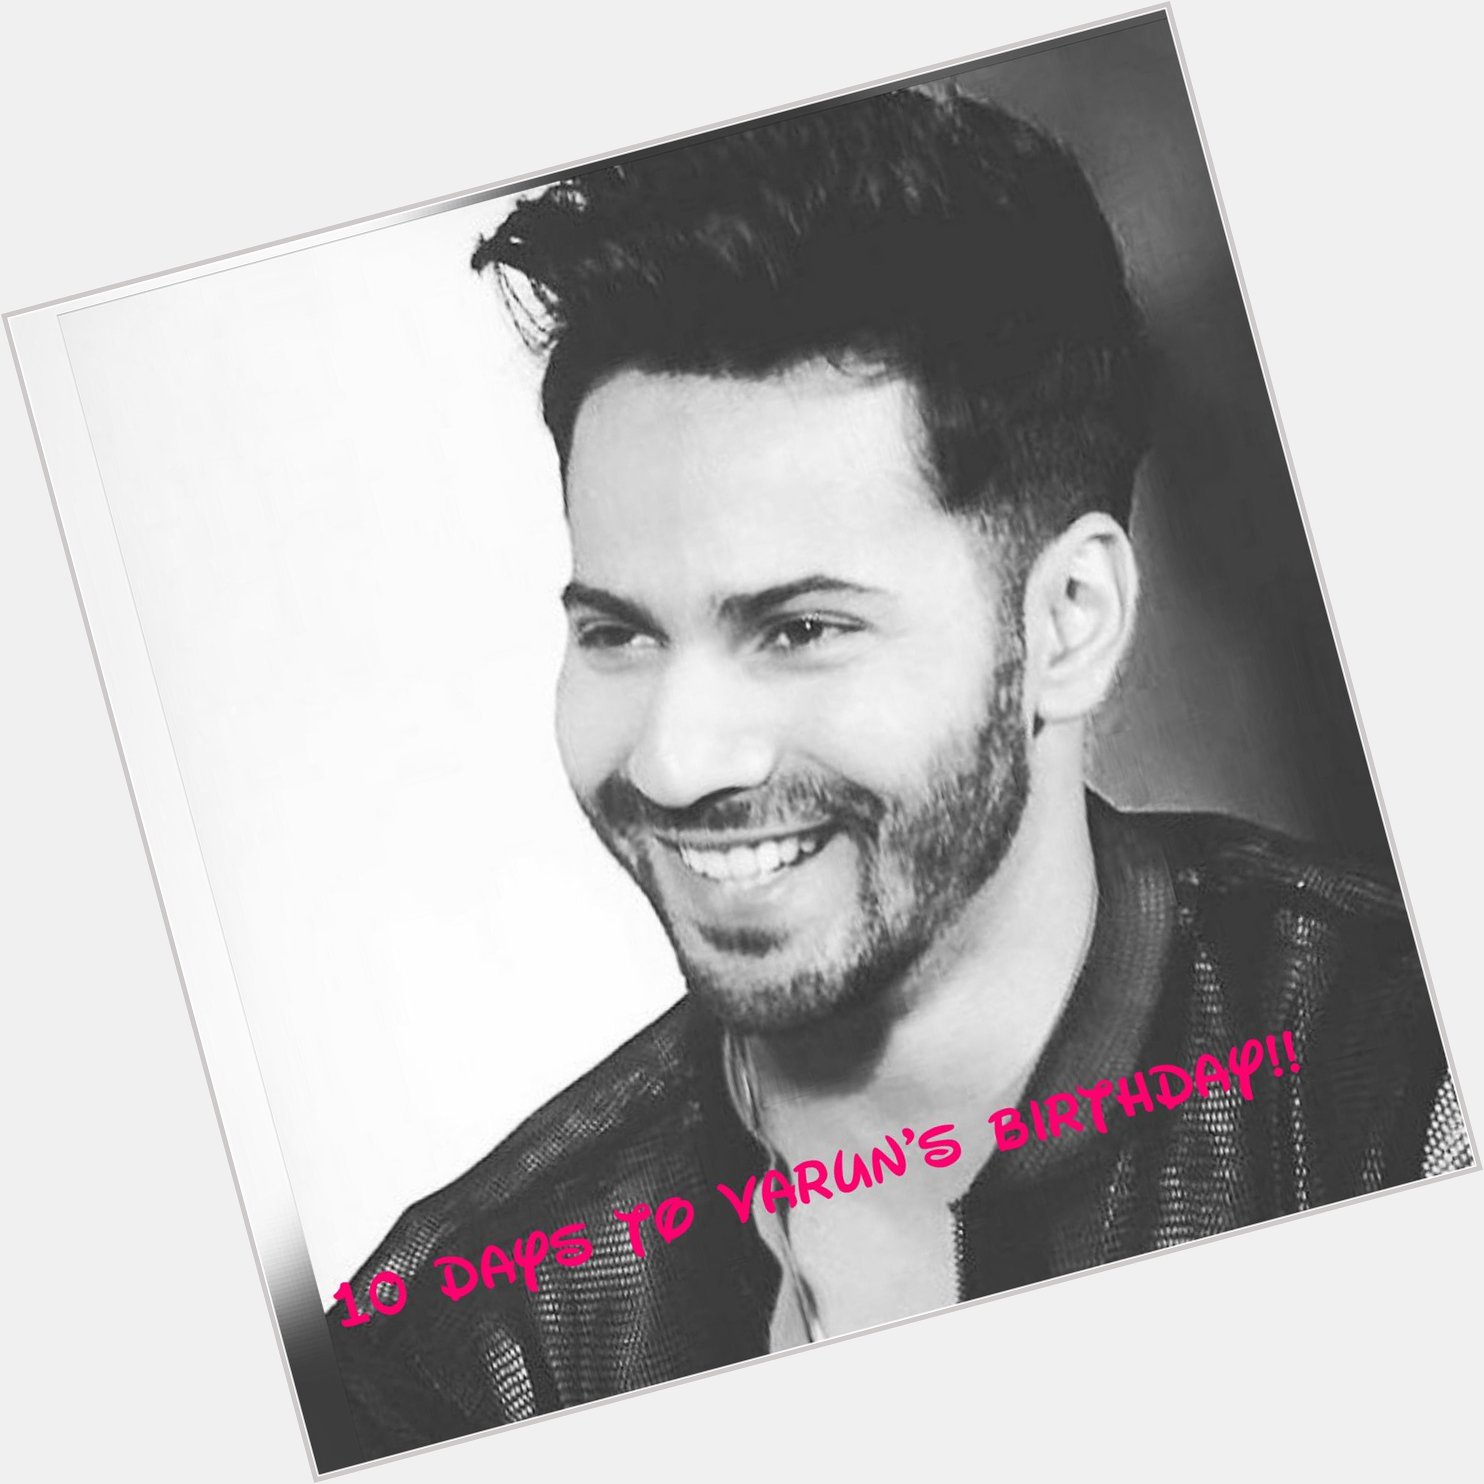 Just 10 days left for our birthday!!!!

The countdown begins!
HAPPY BIRTHDAY VARUN DHAWAN 